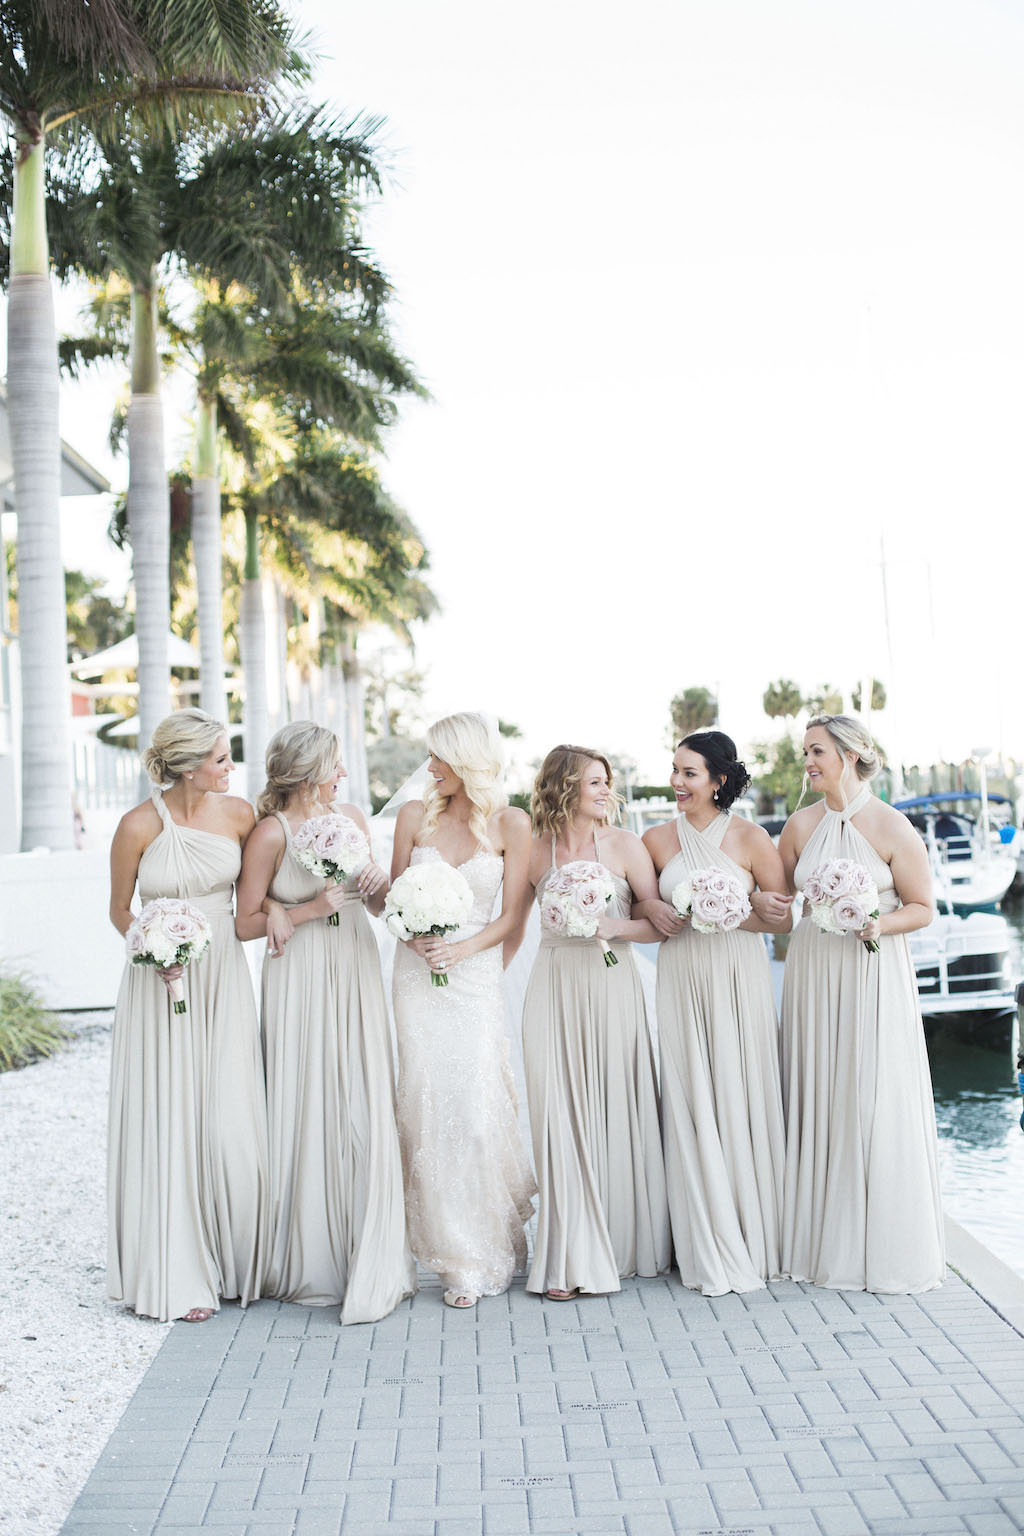 Outdoor Waterfront Bridal Party Portrait, Bridesmaids in Mismatched Ivory Floor Length Dresses with Blush and White Bouquets | Sarasota Wedding Venue Sarasota Yacht Club | Wedding Planner NK Productions